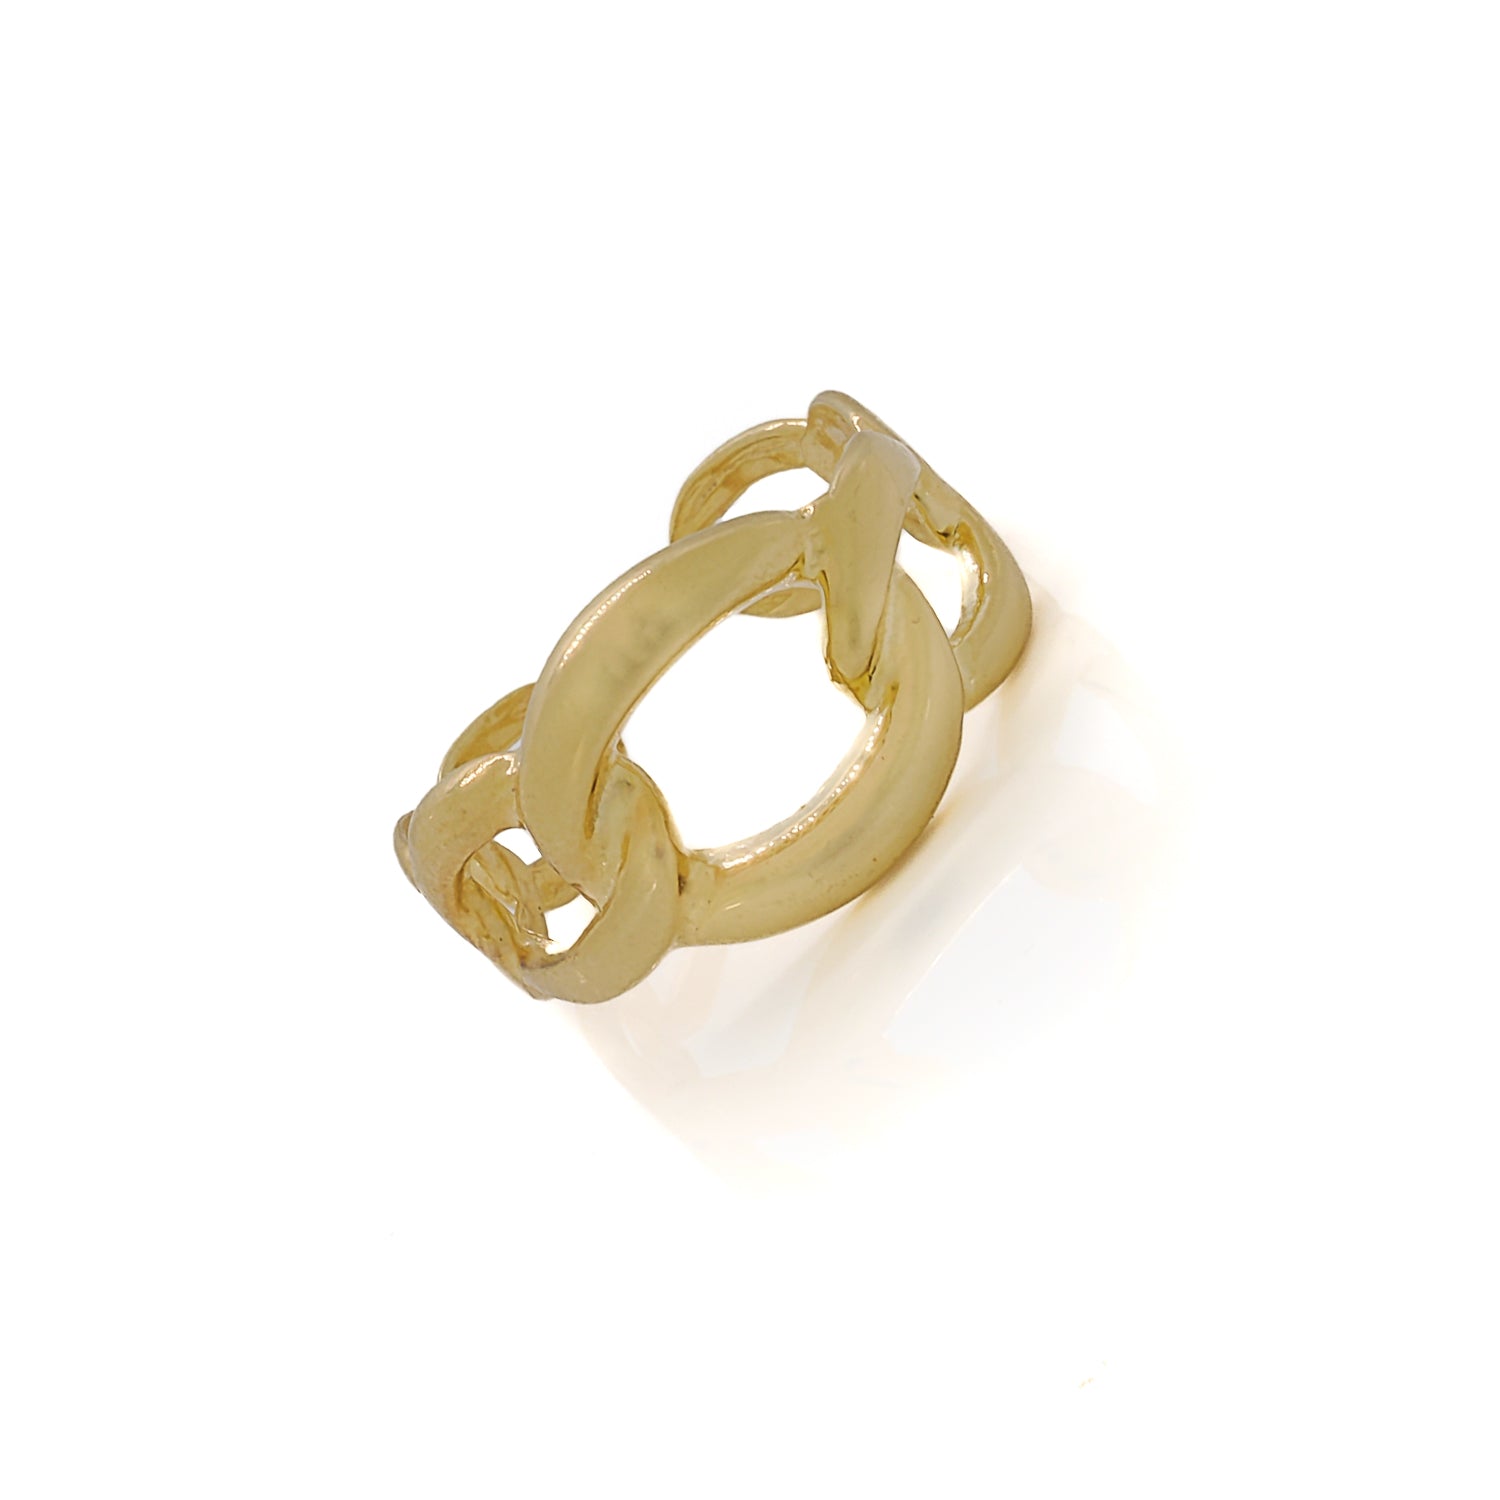 Chic Mira Gold Ring - Adjustable Size and Modern Design